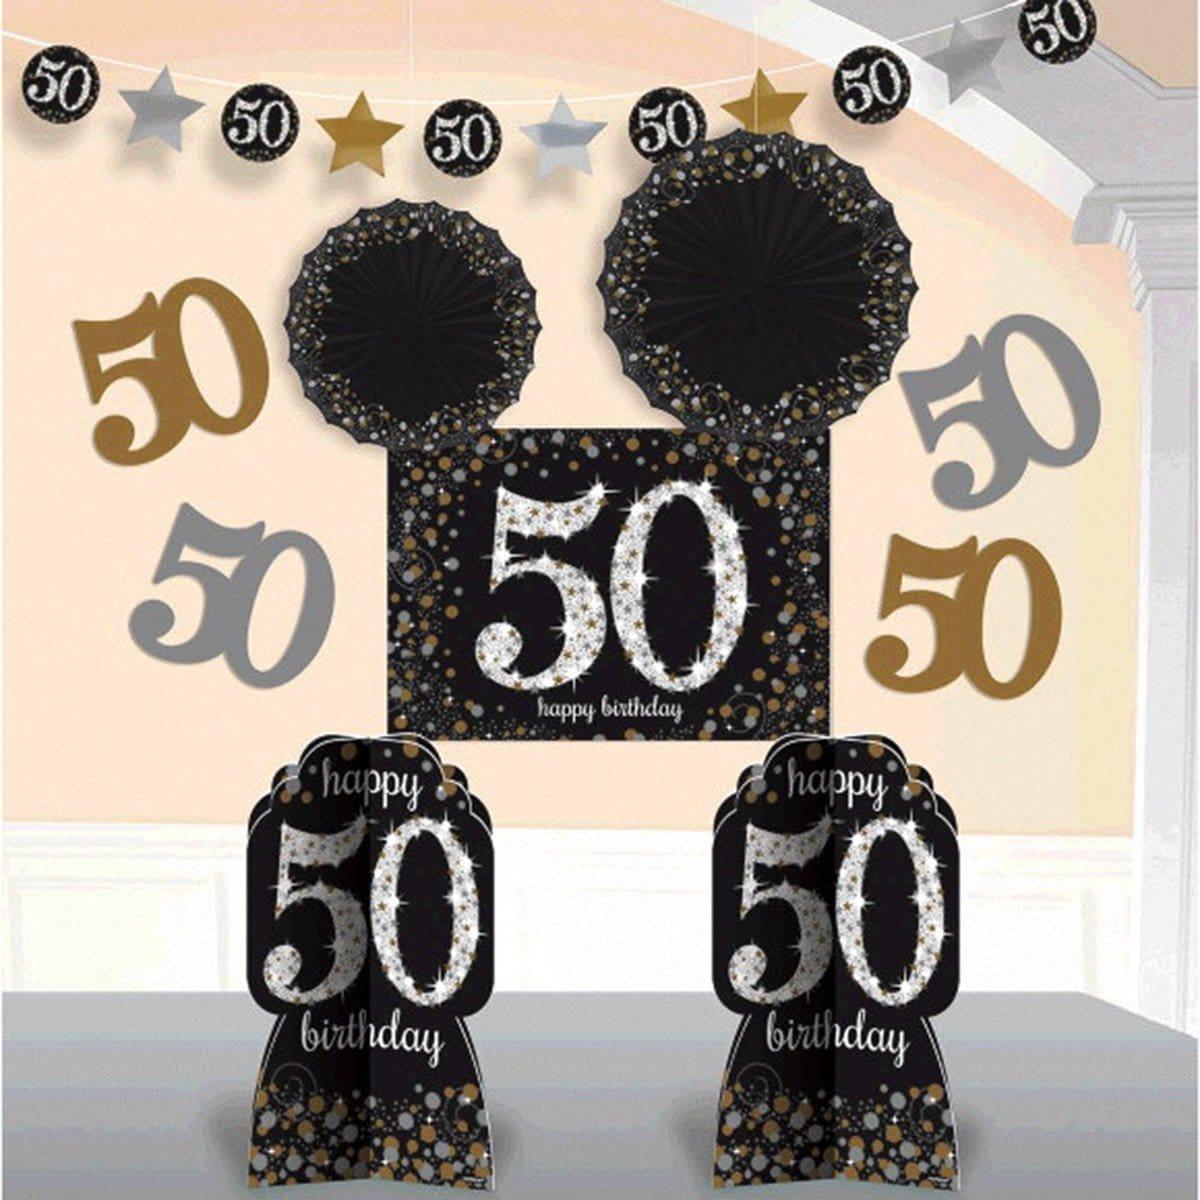 Buy Age Specific Birthday 50th Sparkling Celeb - Room Decorating Kit sold at Party Expert